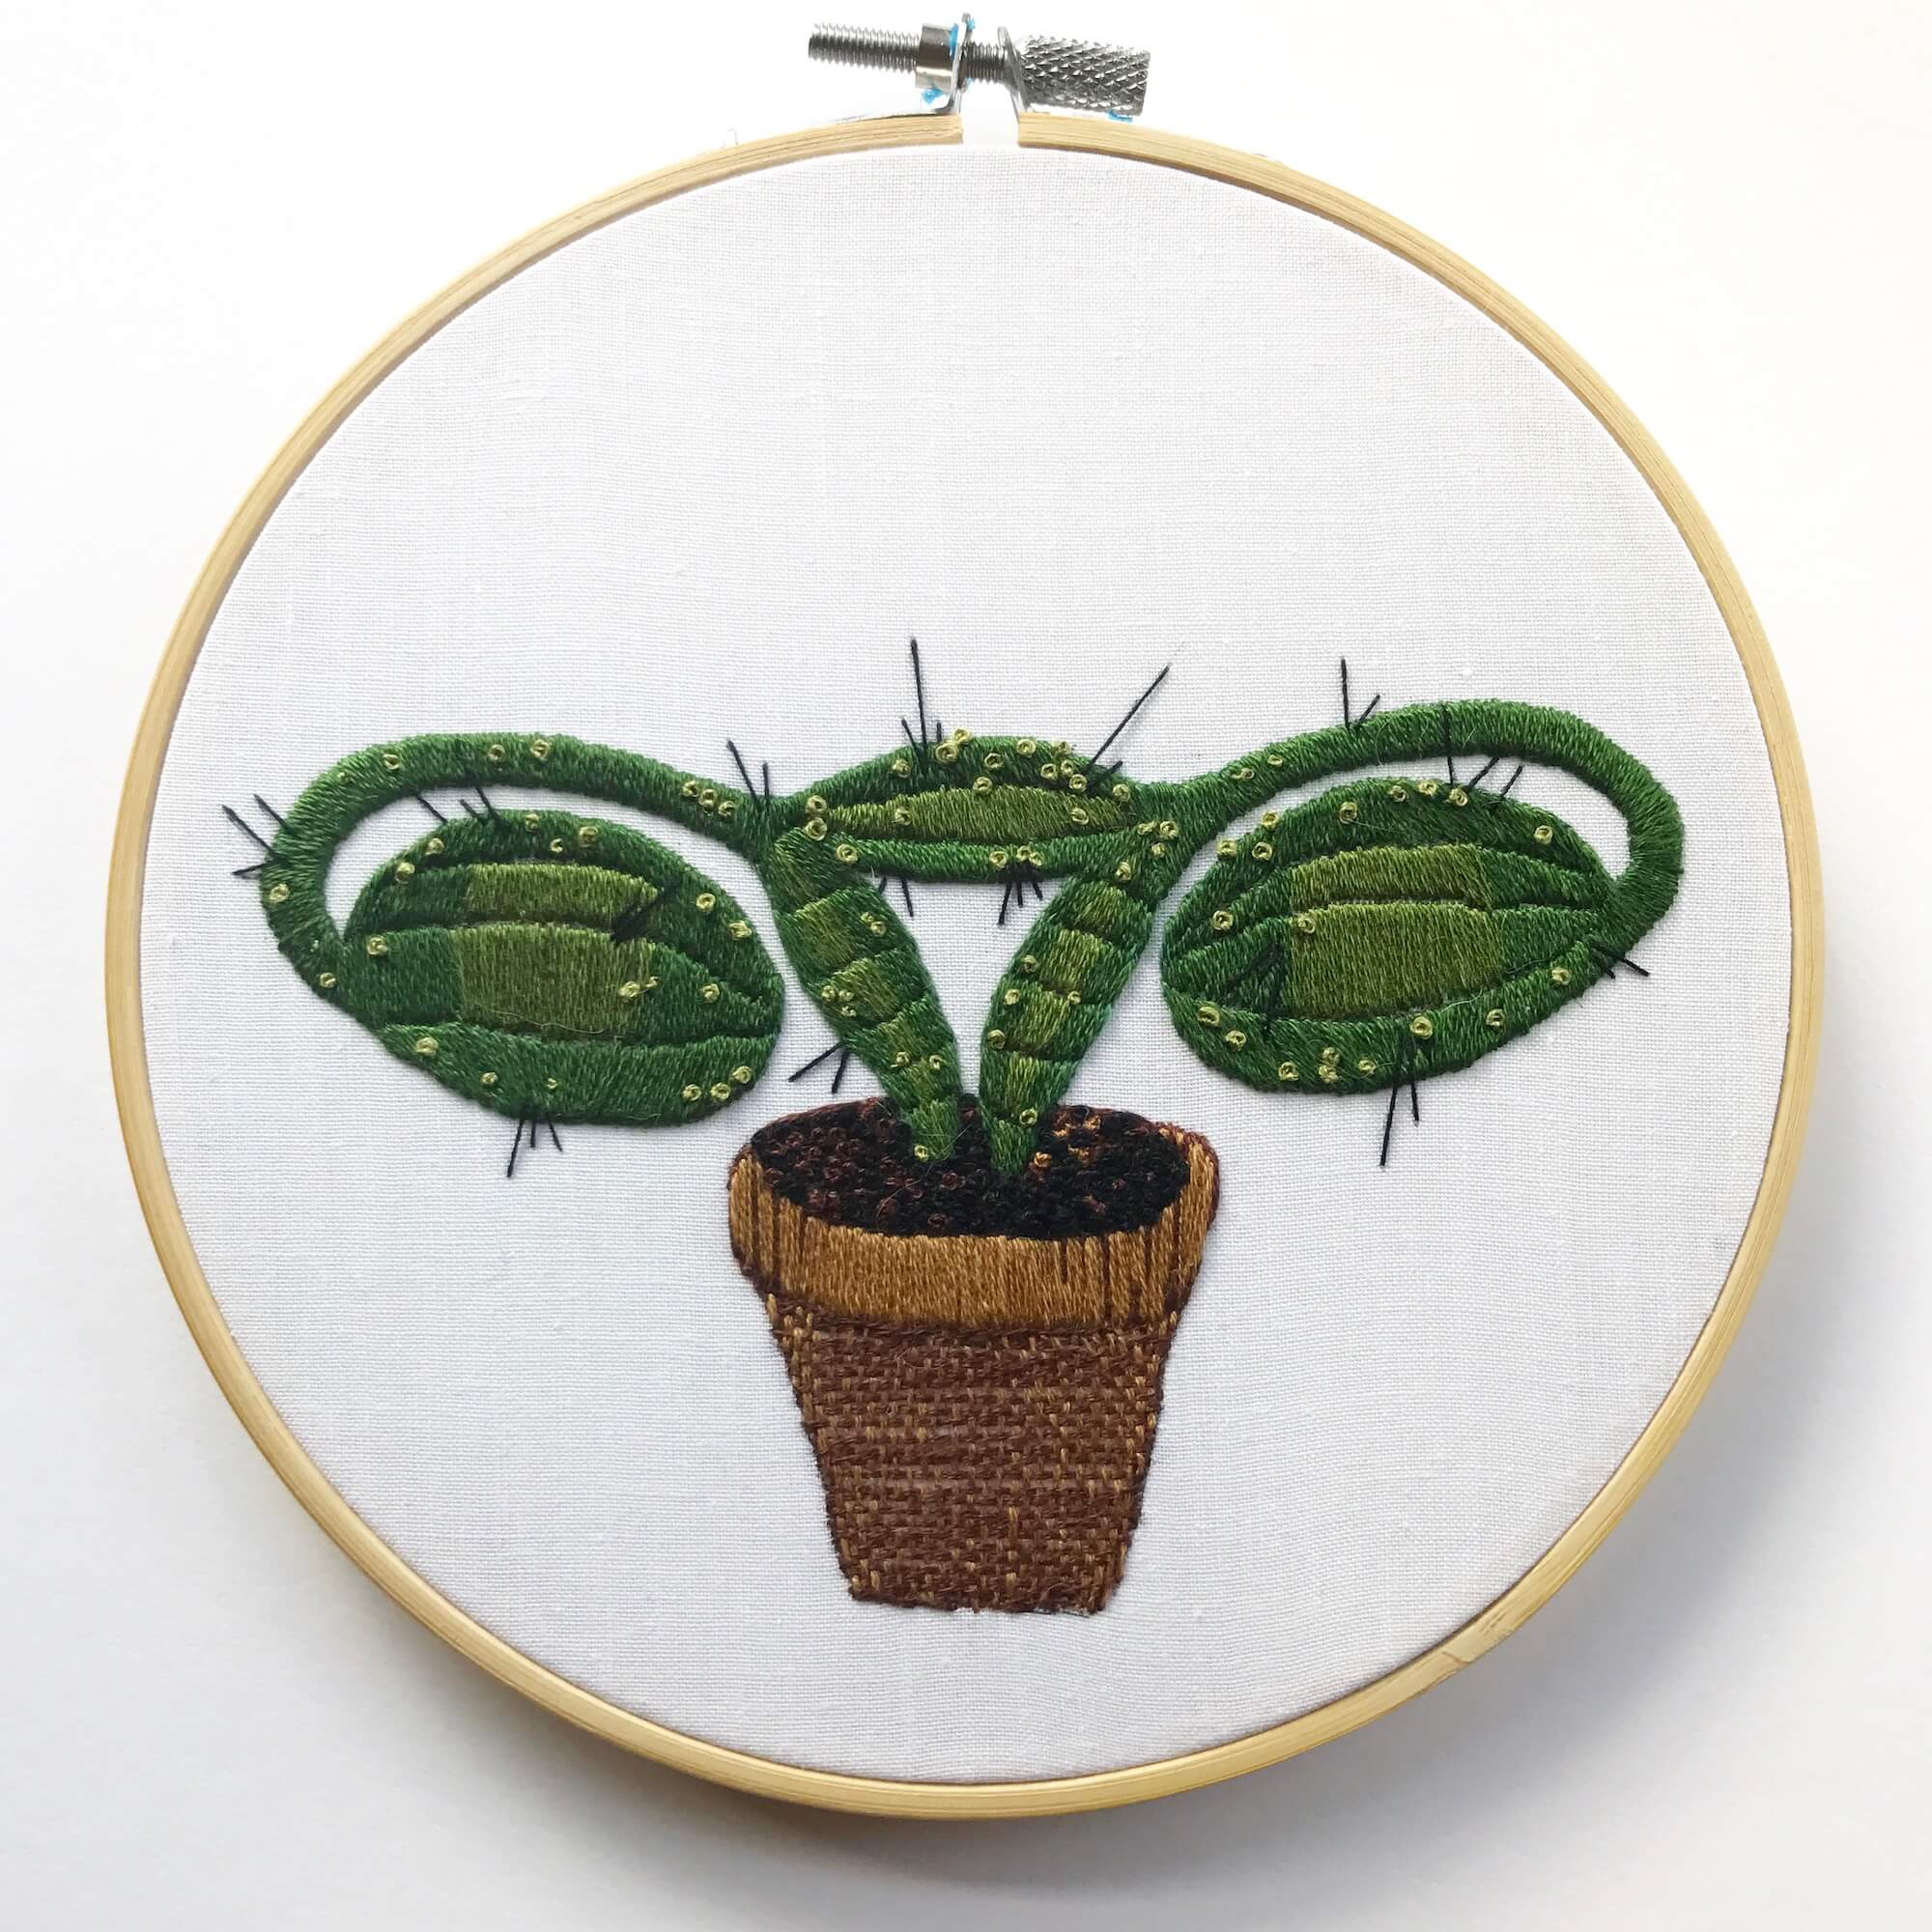 Ovaries embroidery with cactus motif